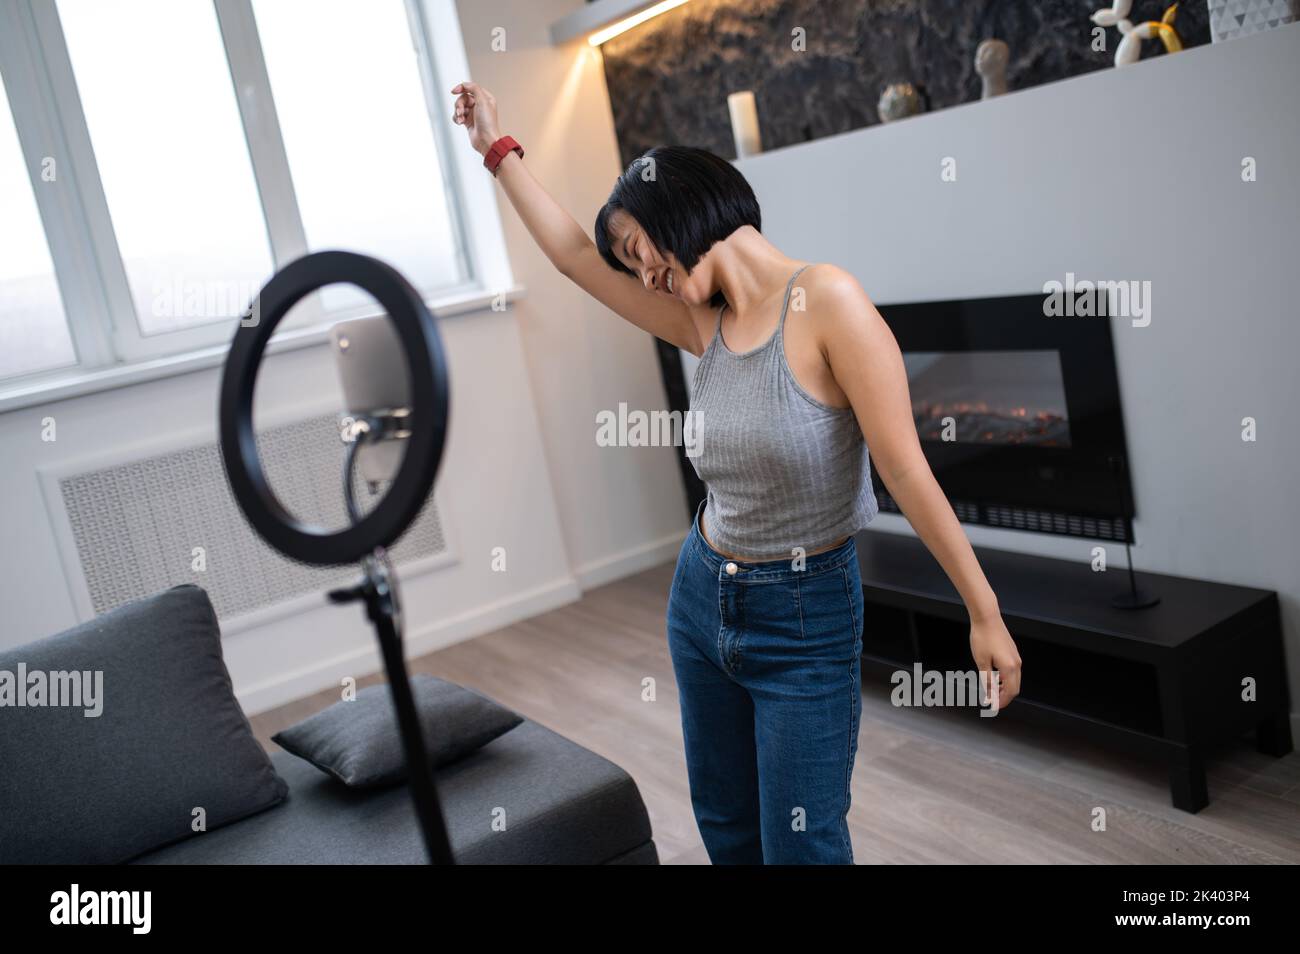 Joyful young vlogger live-streaming her dance class to online followers Stock Photo